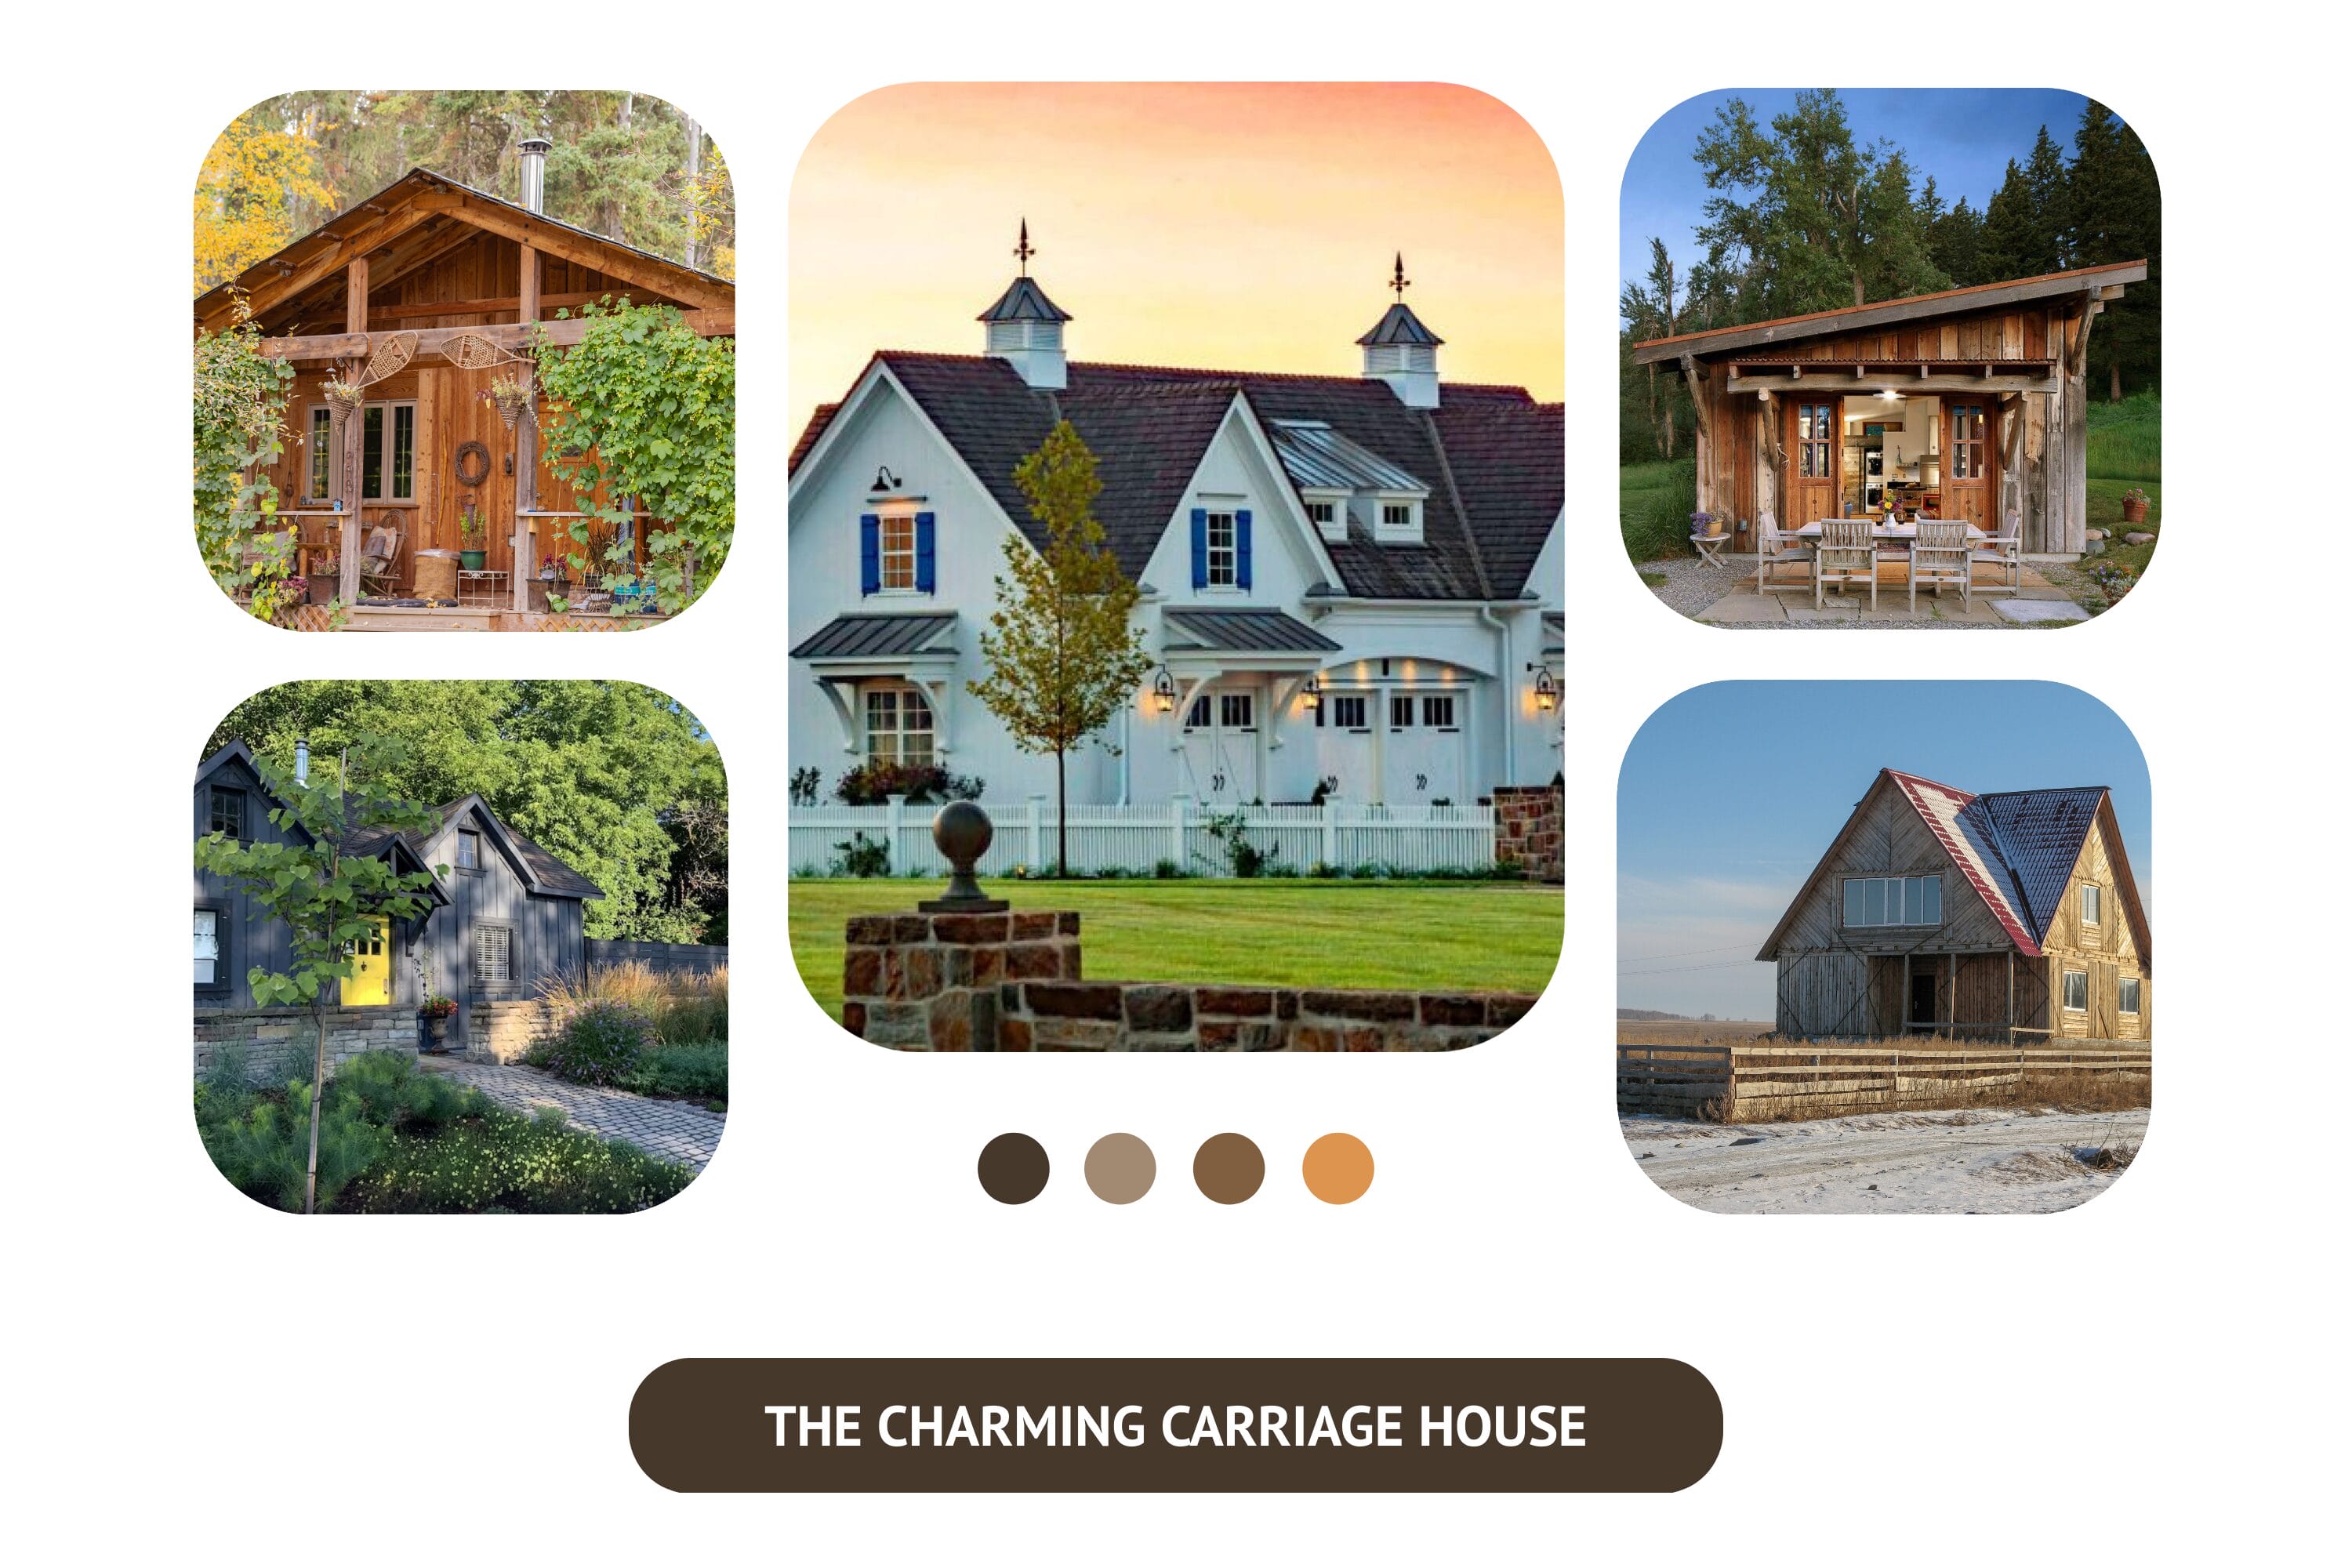 The Charming Carriage House Plan